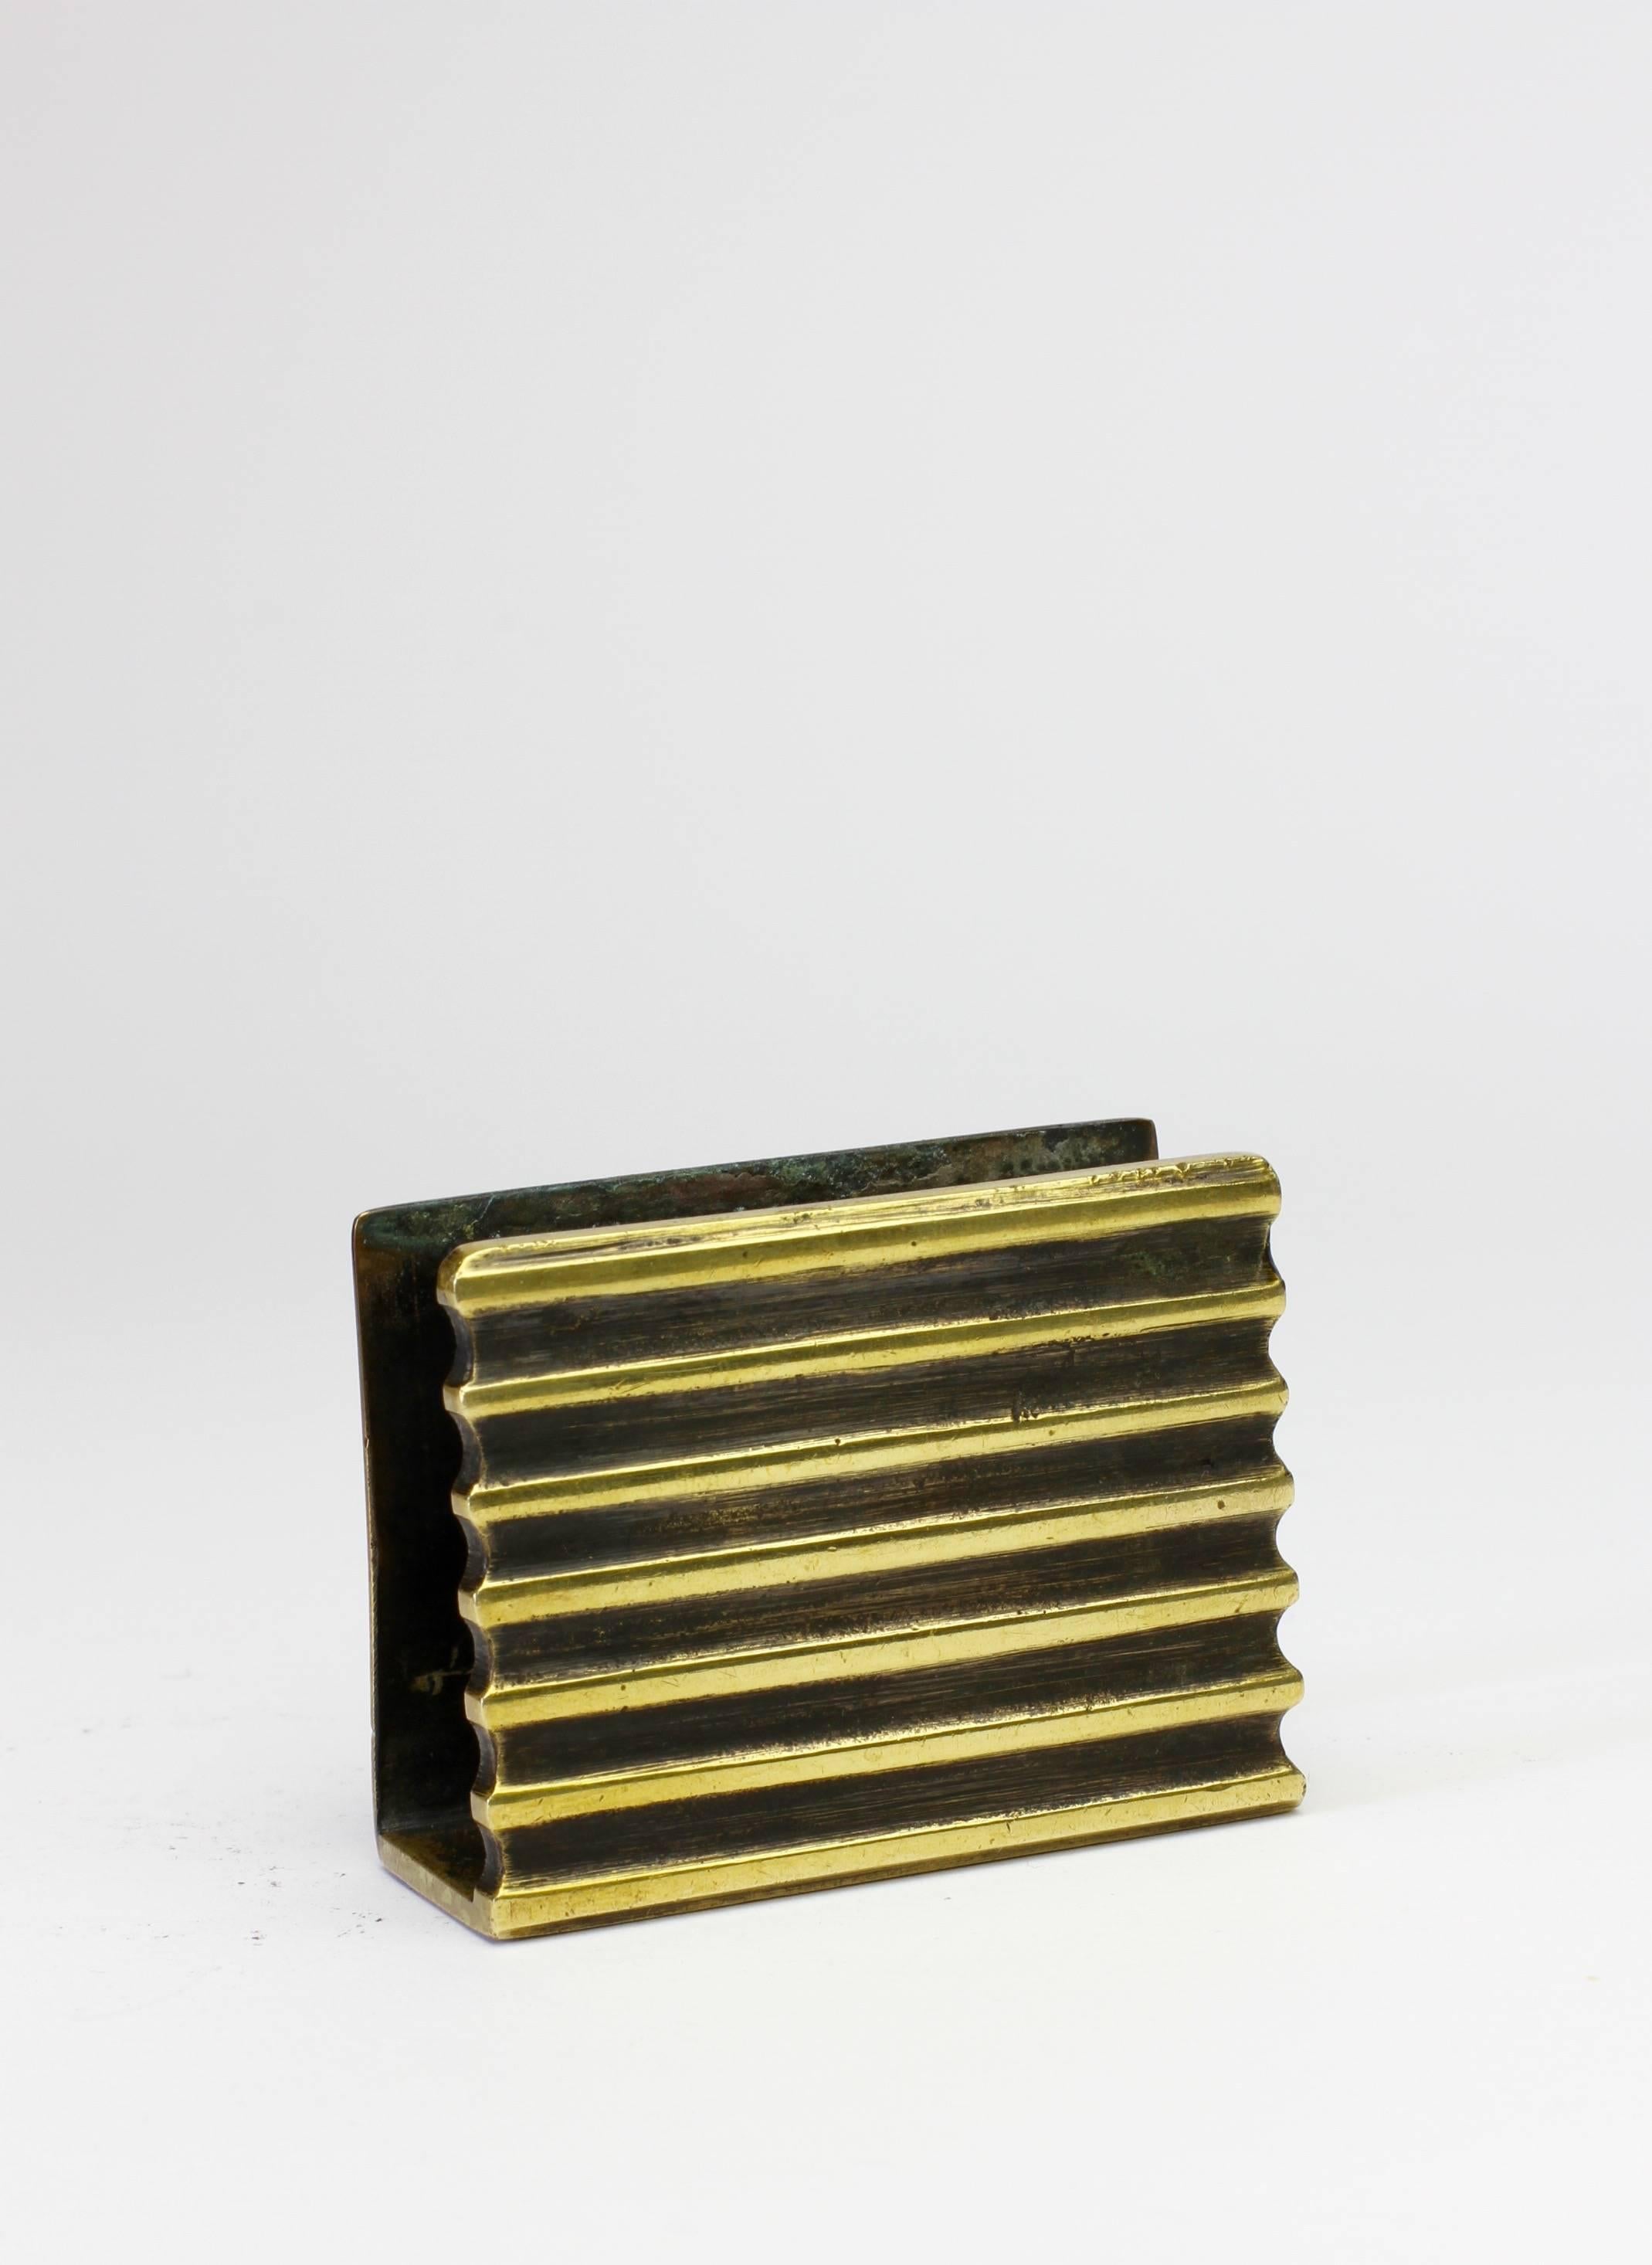 A rare 1950s brass matchbox holder by Austrian born designer Walter Bosse, circa 1954.

Perfect for the gentleman or lady smoker and could also be used to accessorise your desk as a business card holder.

Complete set available, as shown in the last